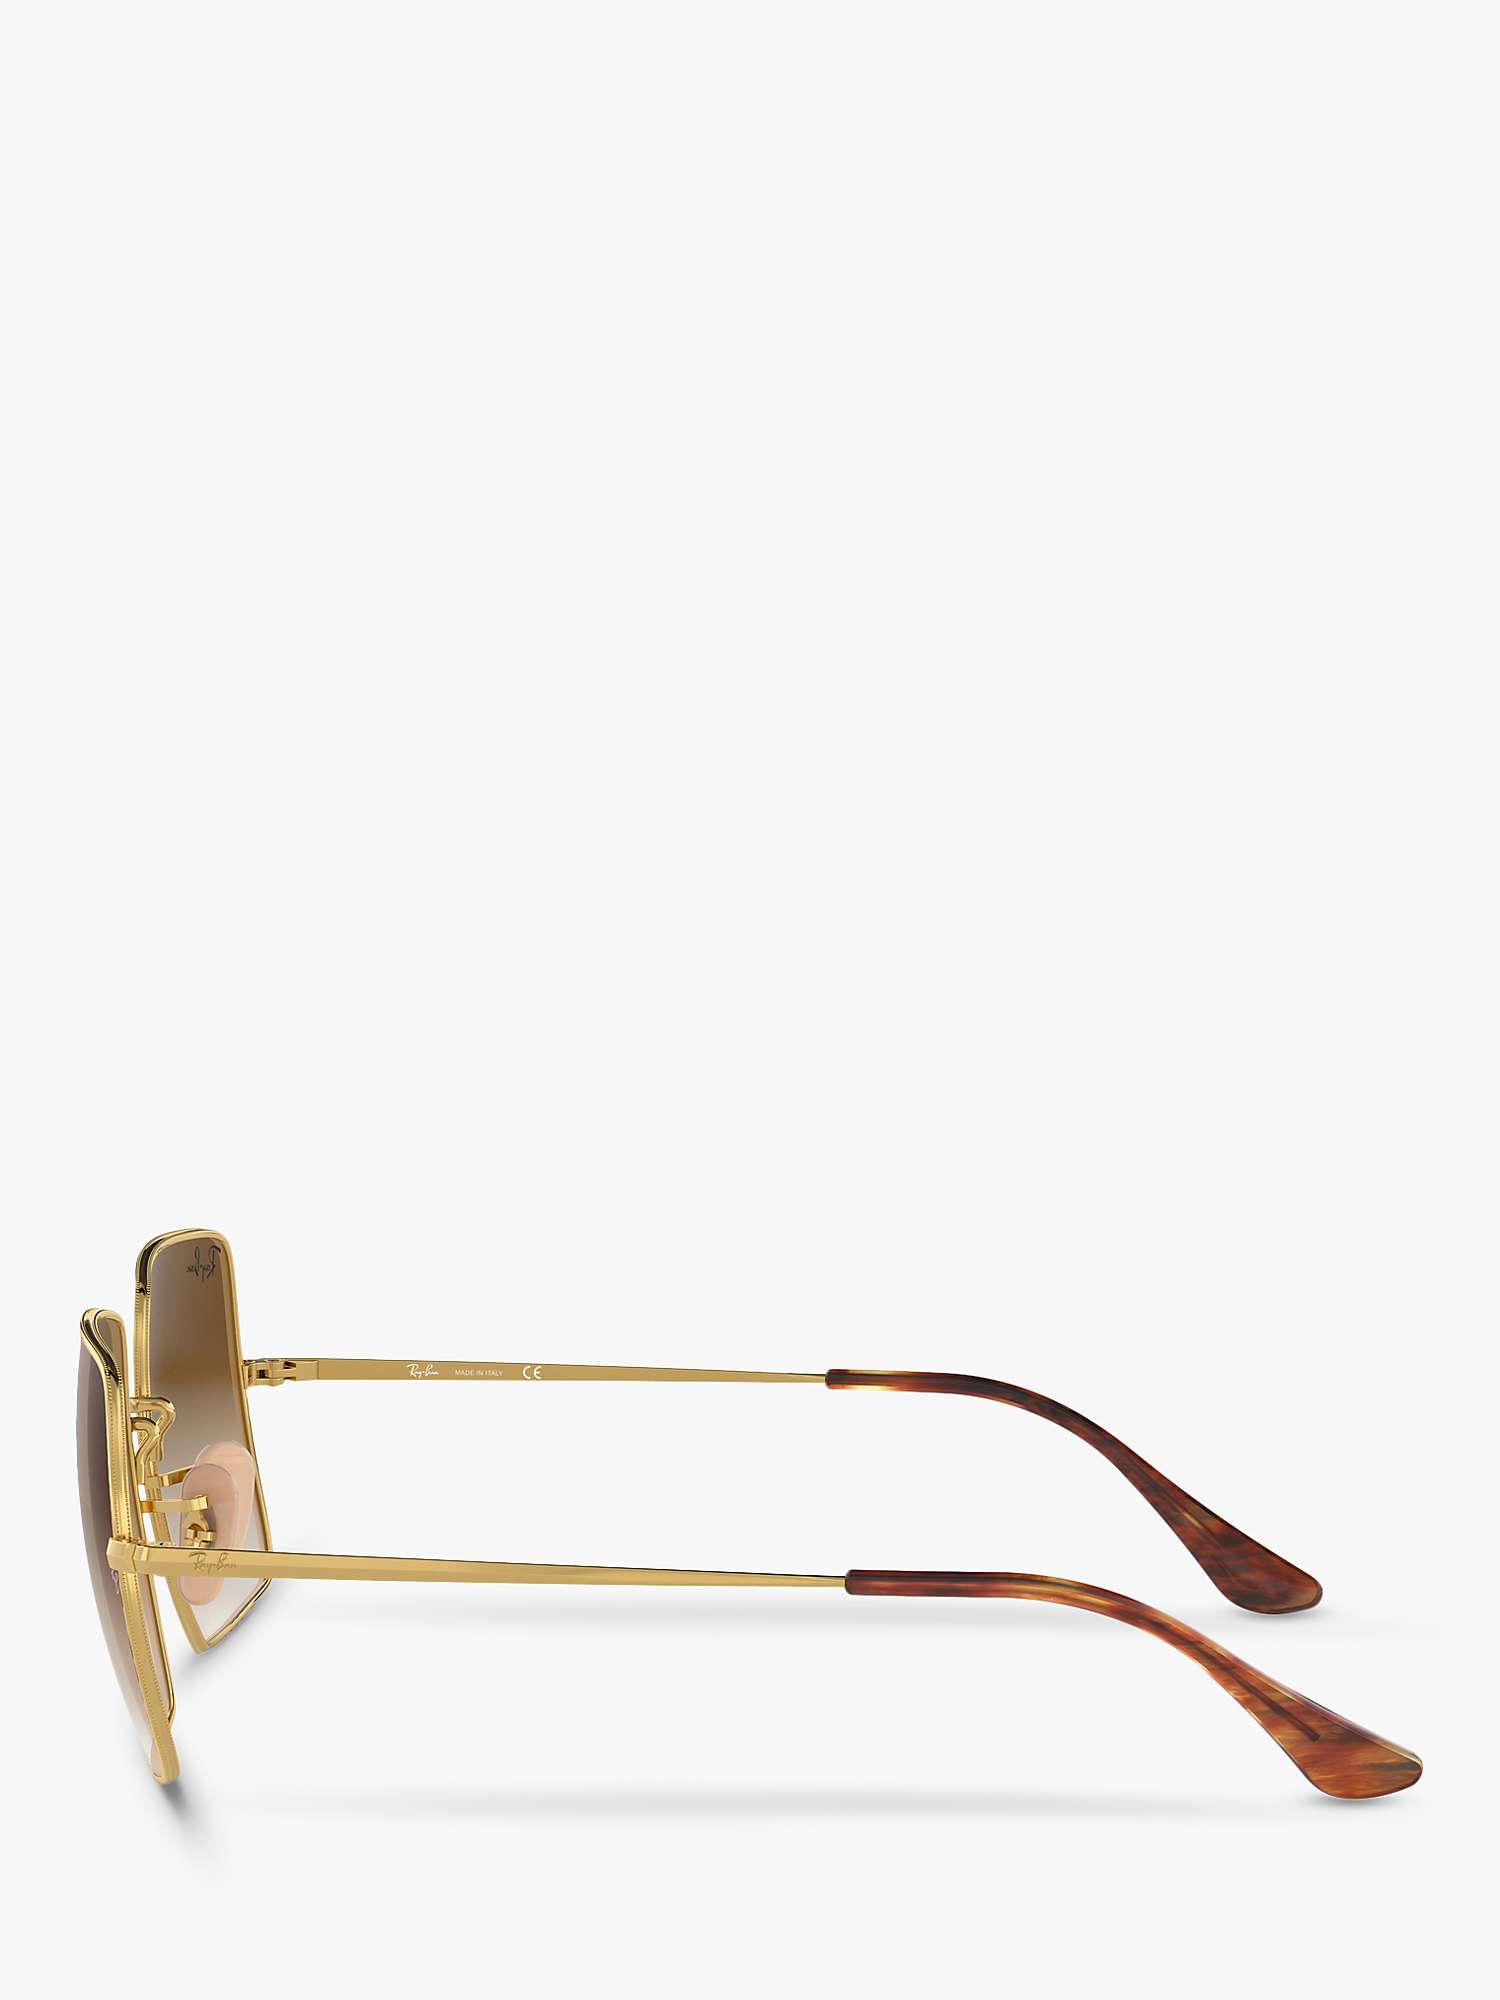 Buy Ray-Ban RB1971 Unisex Square Sunglasses, Gold/Brown Gradient Online at johnlewis.com